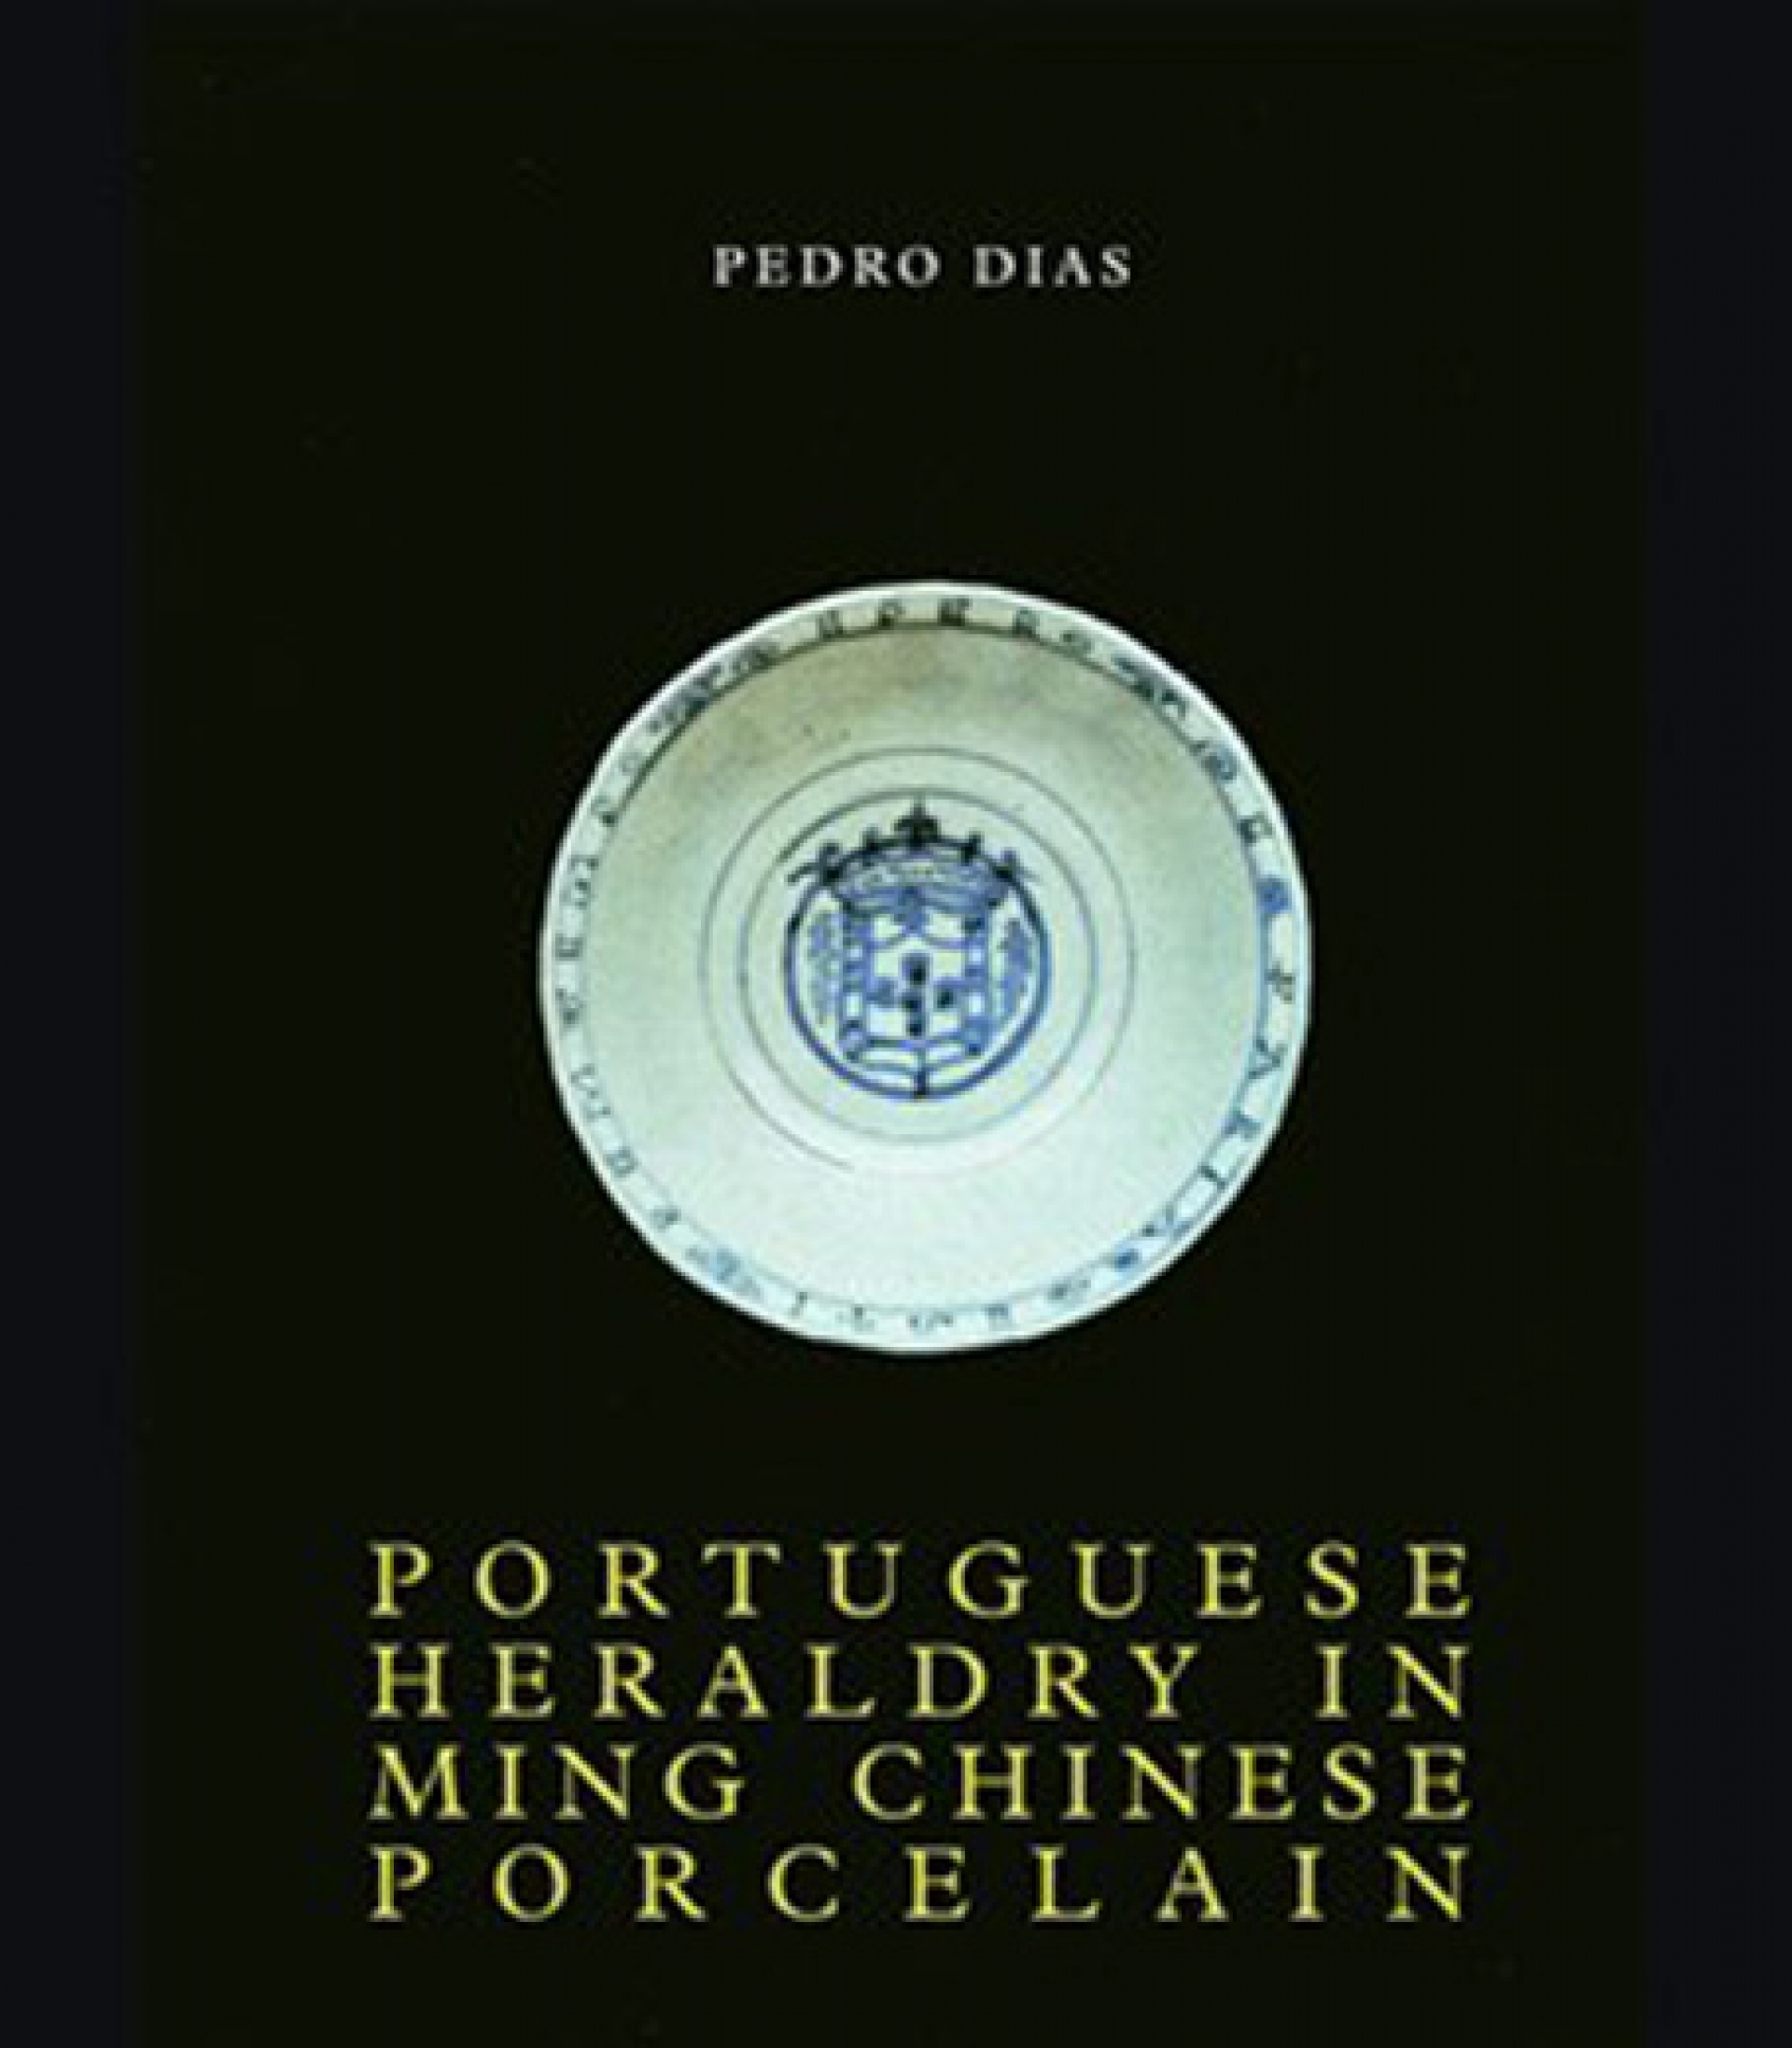 Portuguese heraldy in Ming Chinese porcelain 